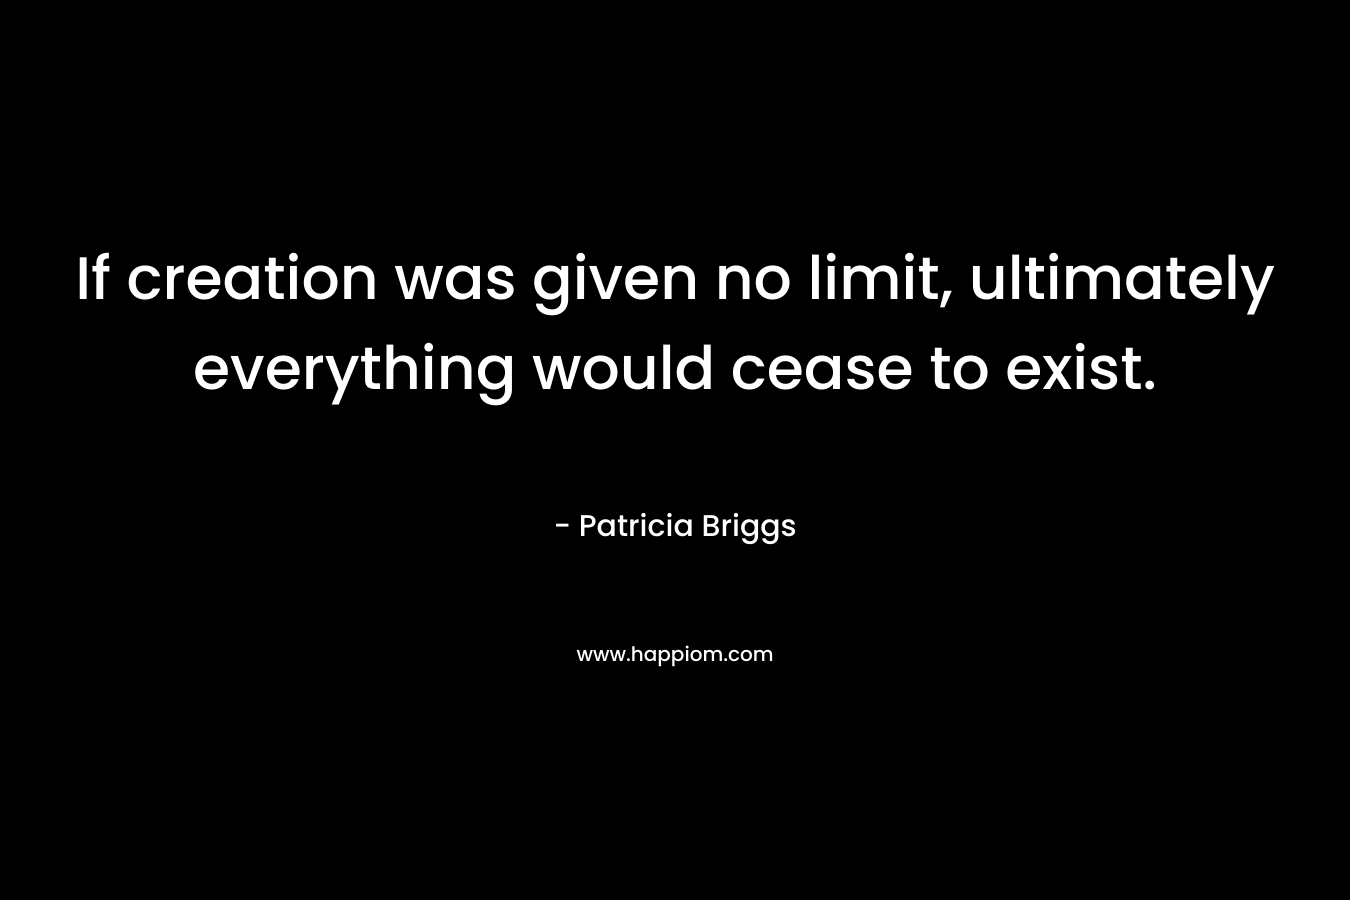 If creation was given no limit, ultimately everything would cease to exist. – Patricia Briggs